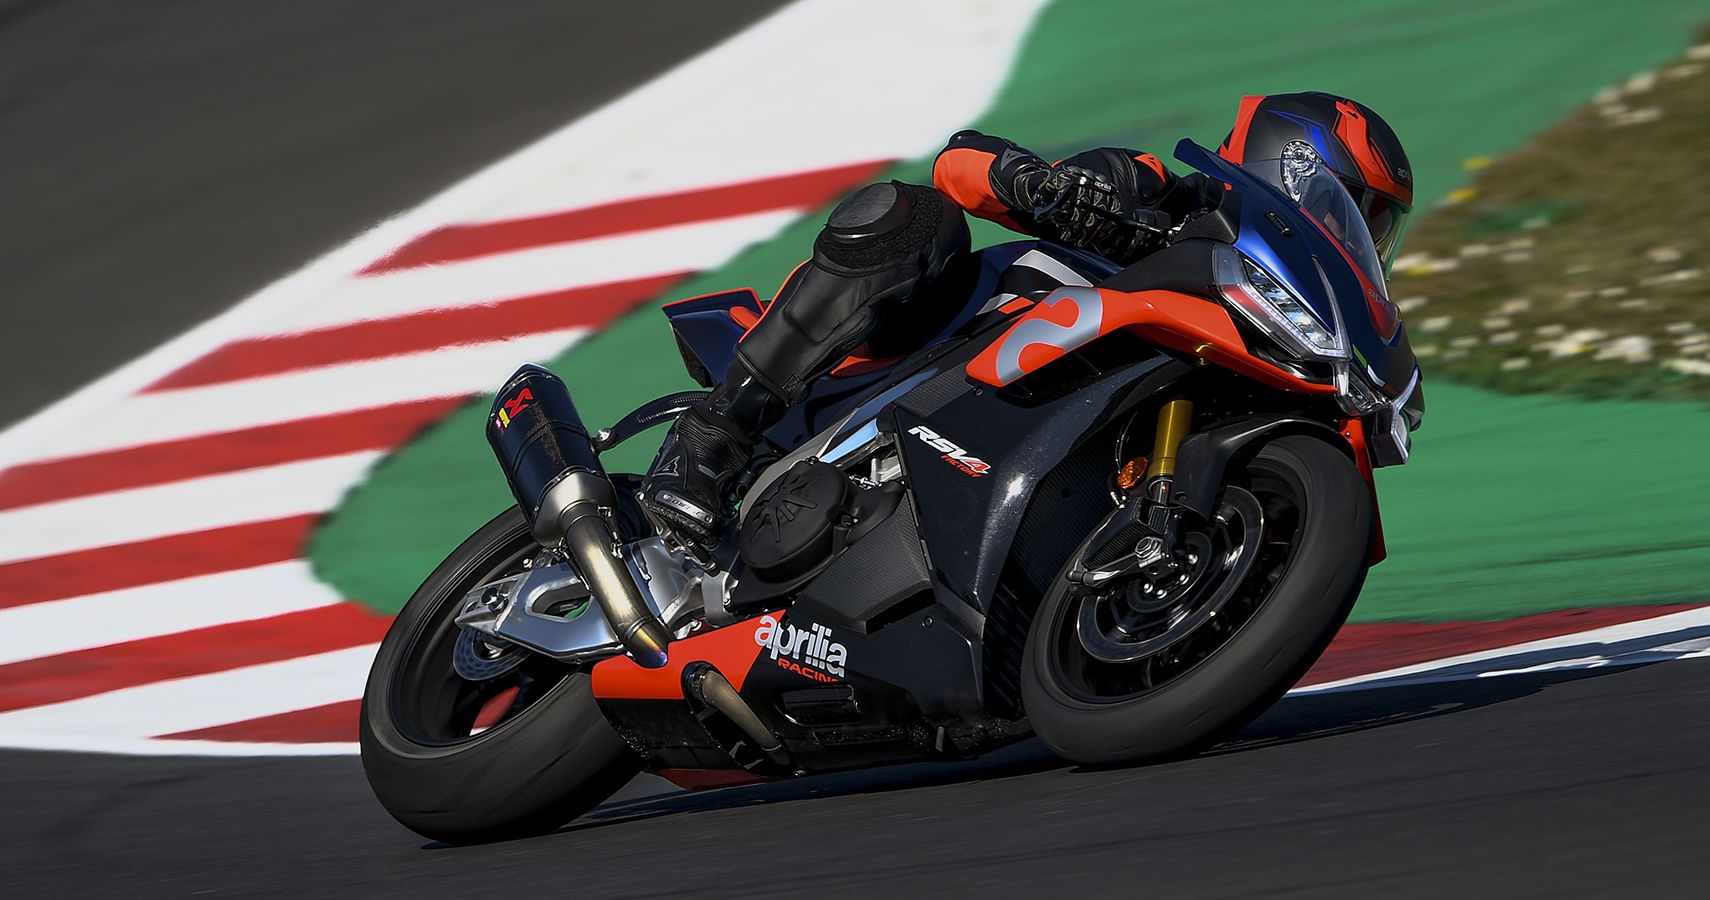 Black and red Italian superbike on track